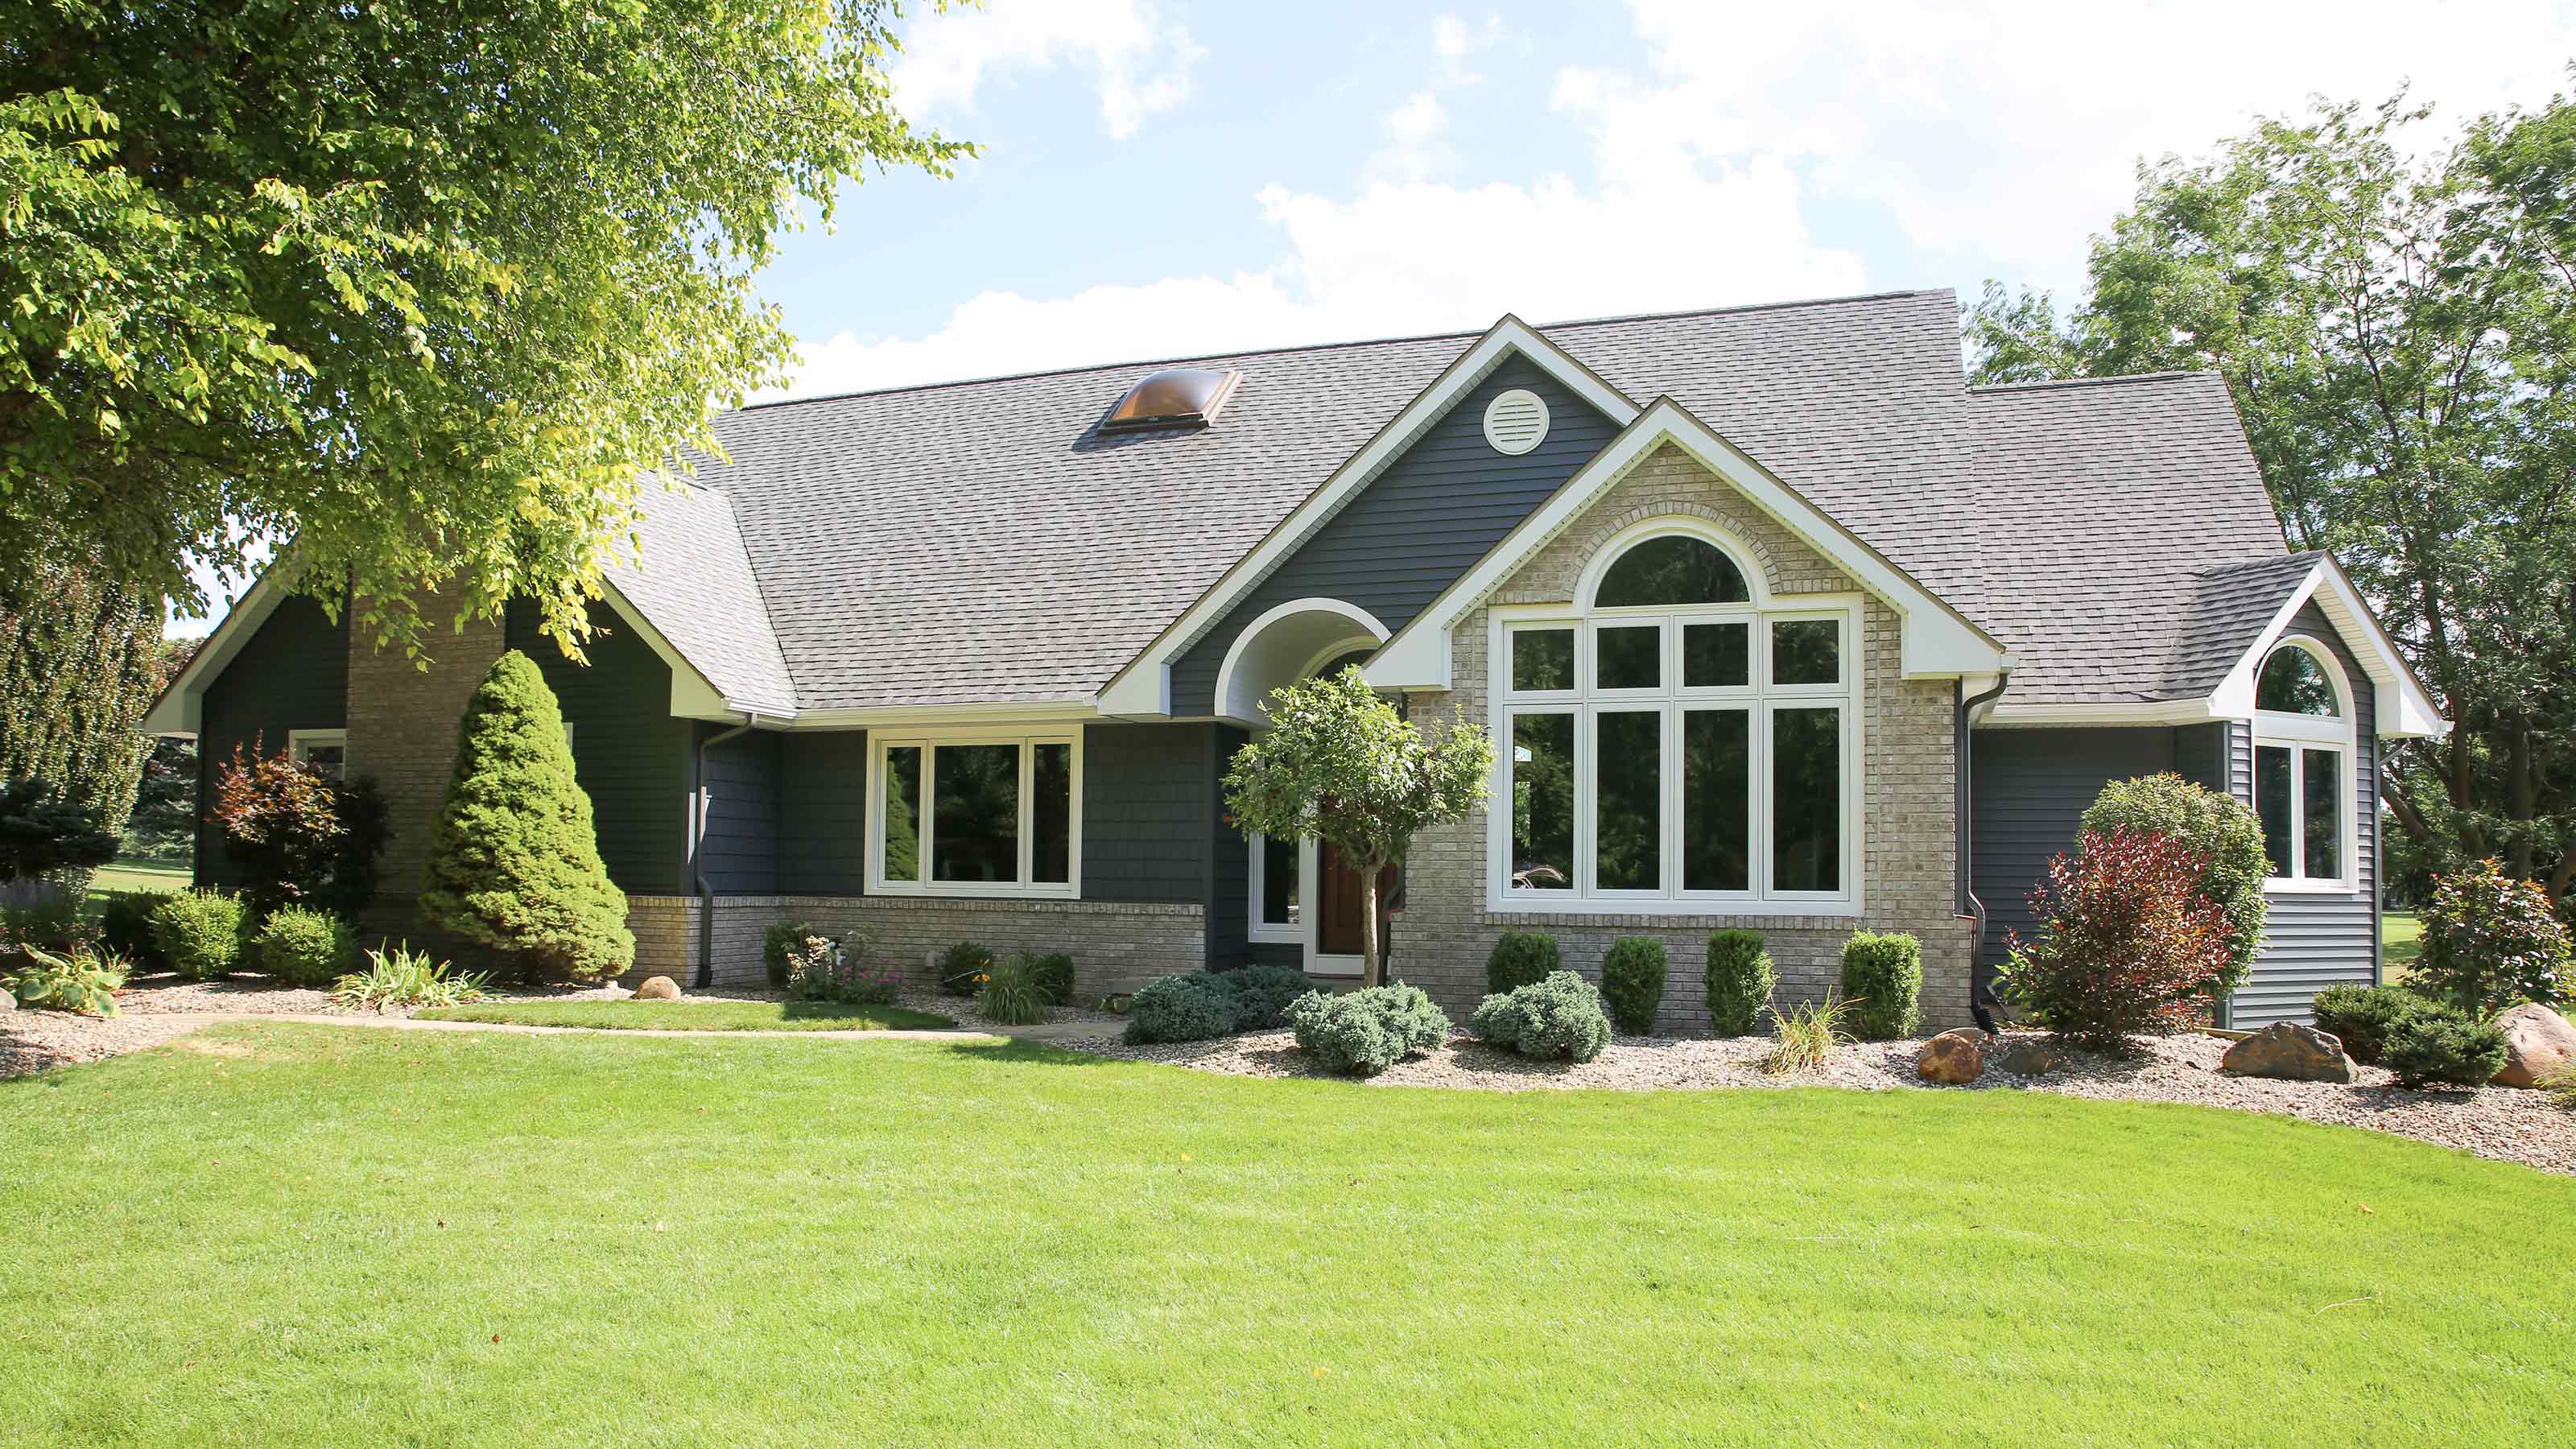 A beautiful home update with new windows, siding & trim from Lakeview Windows & Siding